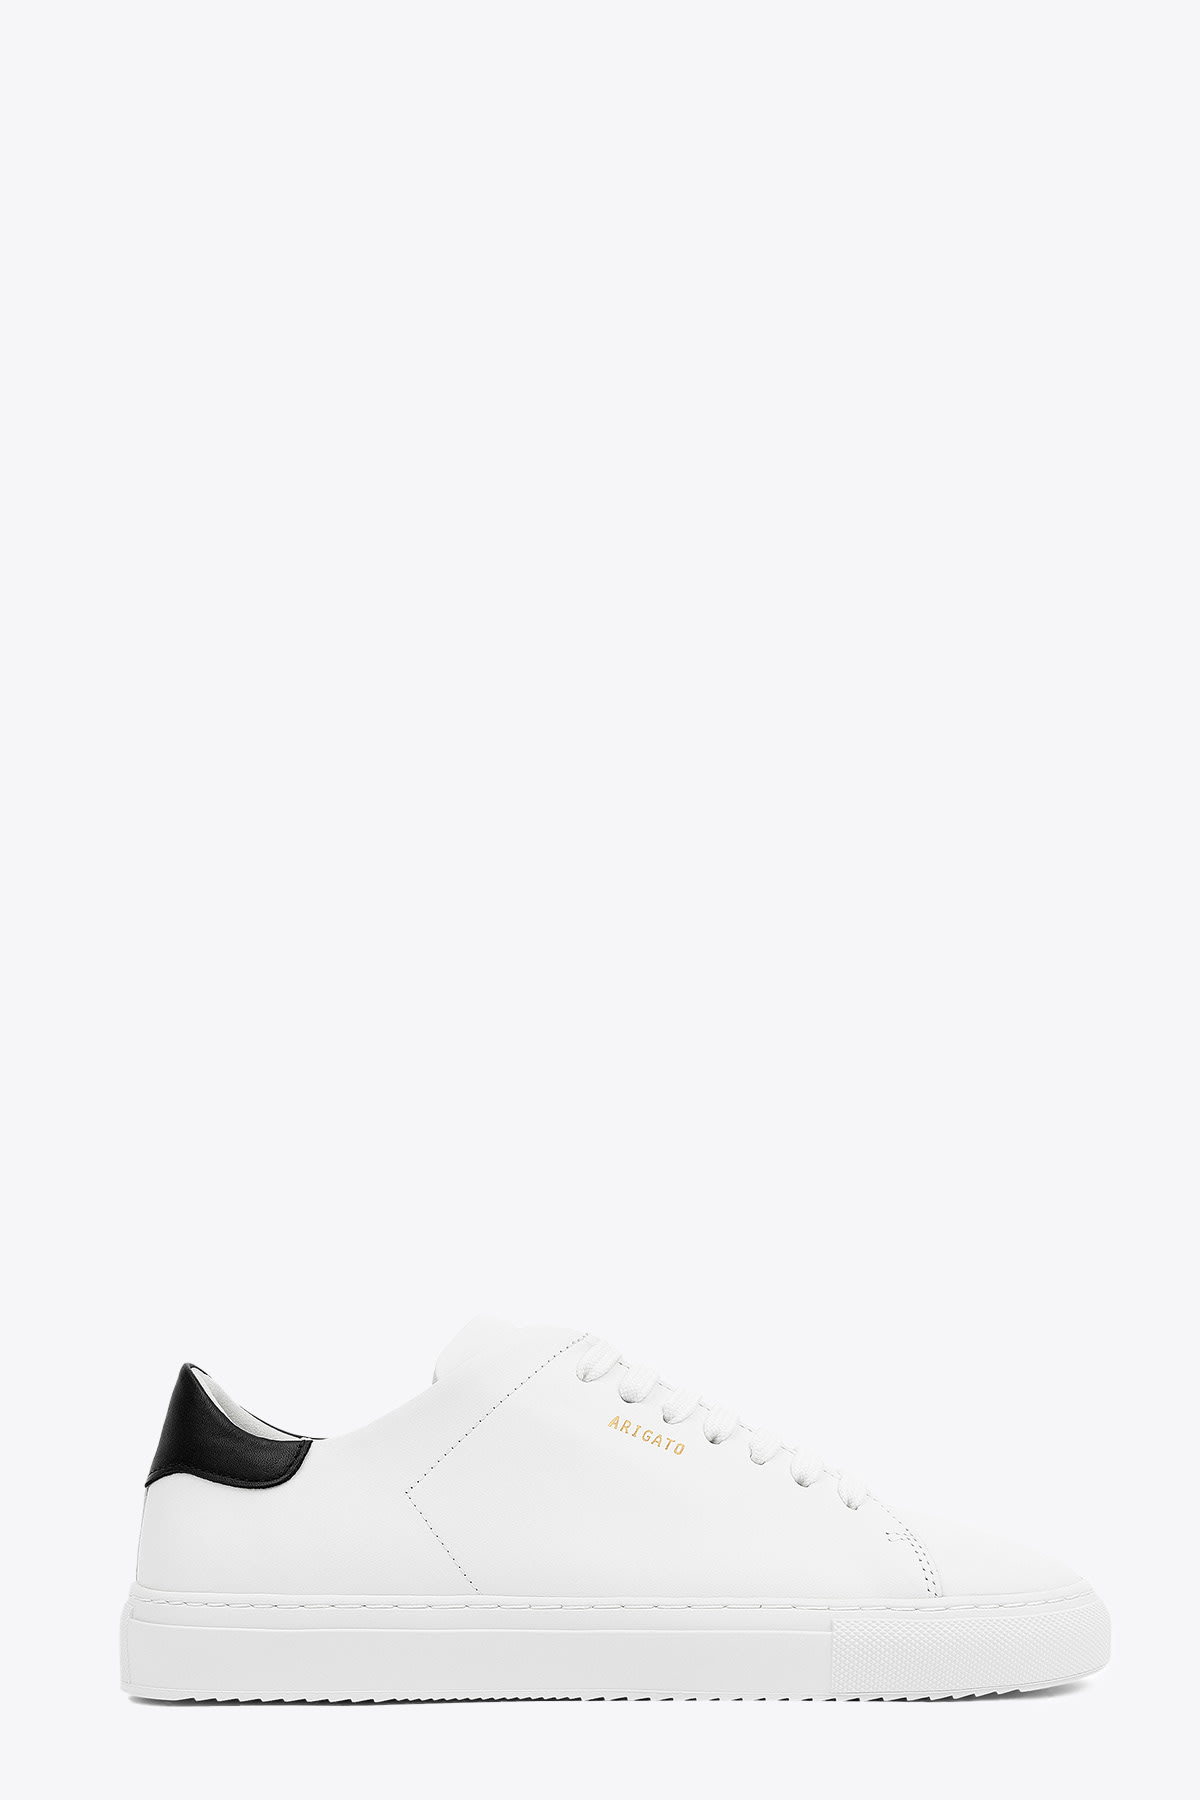 Axel Arigato Clean 90 Contrast Sneakers White leather low sneaker with black tab - Clean 90 Contrast